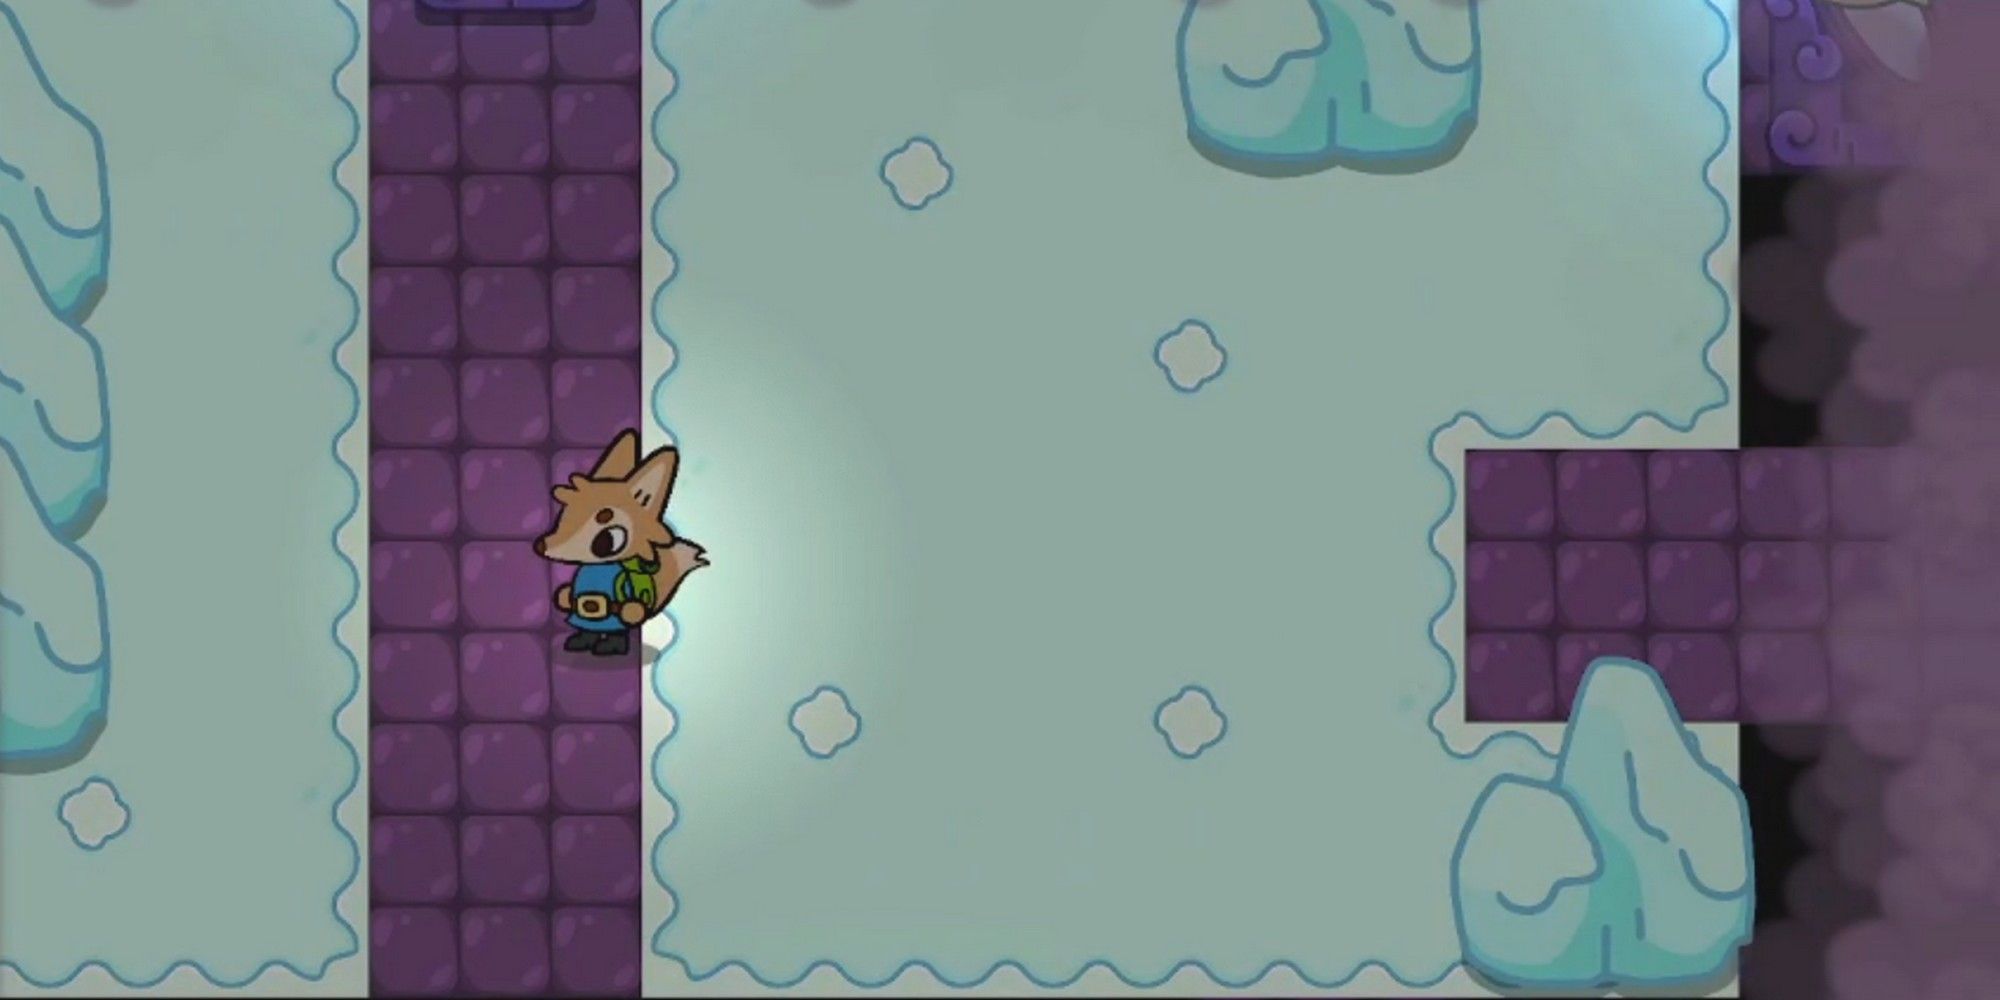 lonesome village wes on the ice puzzle section of the final level